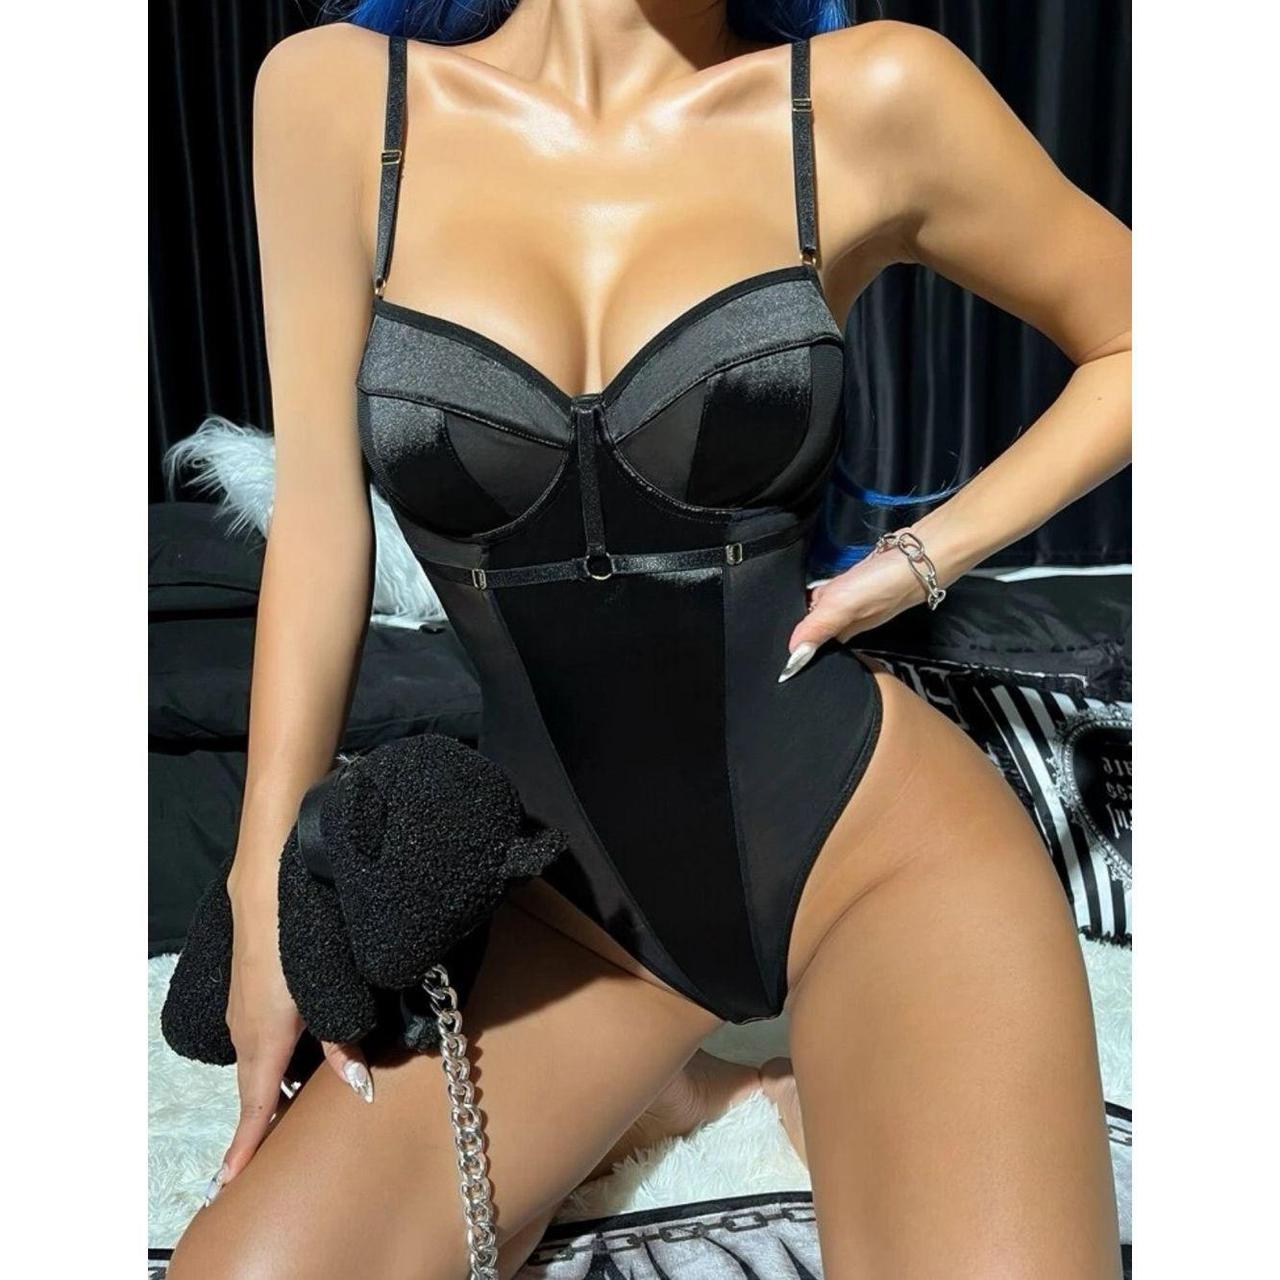 sexy black lace and mesh body suit / corset - Depop